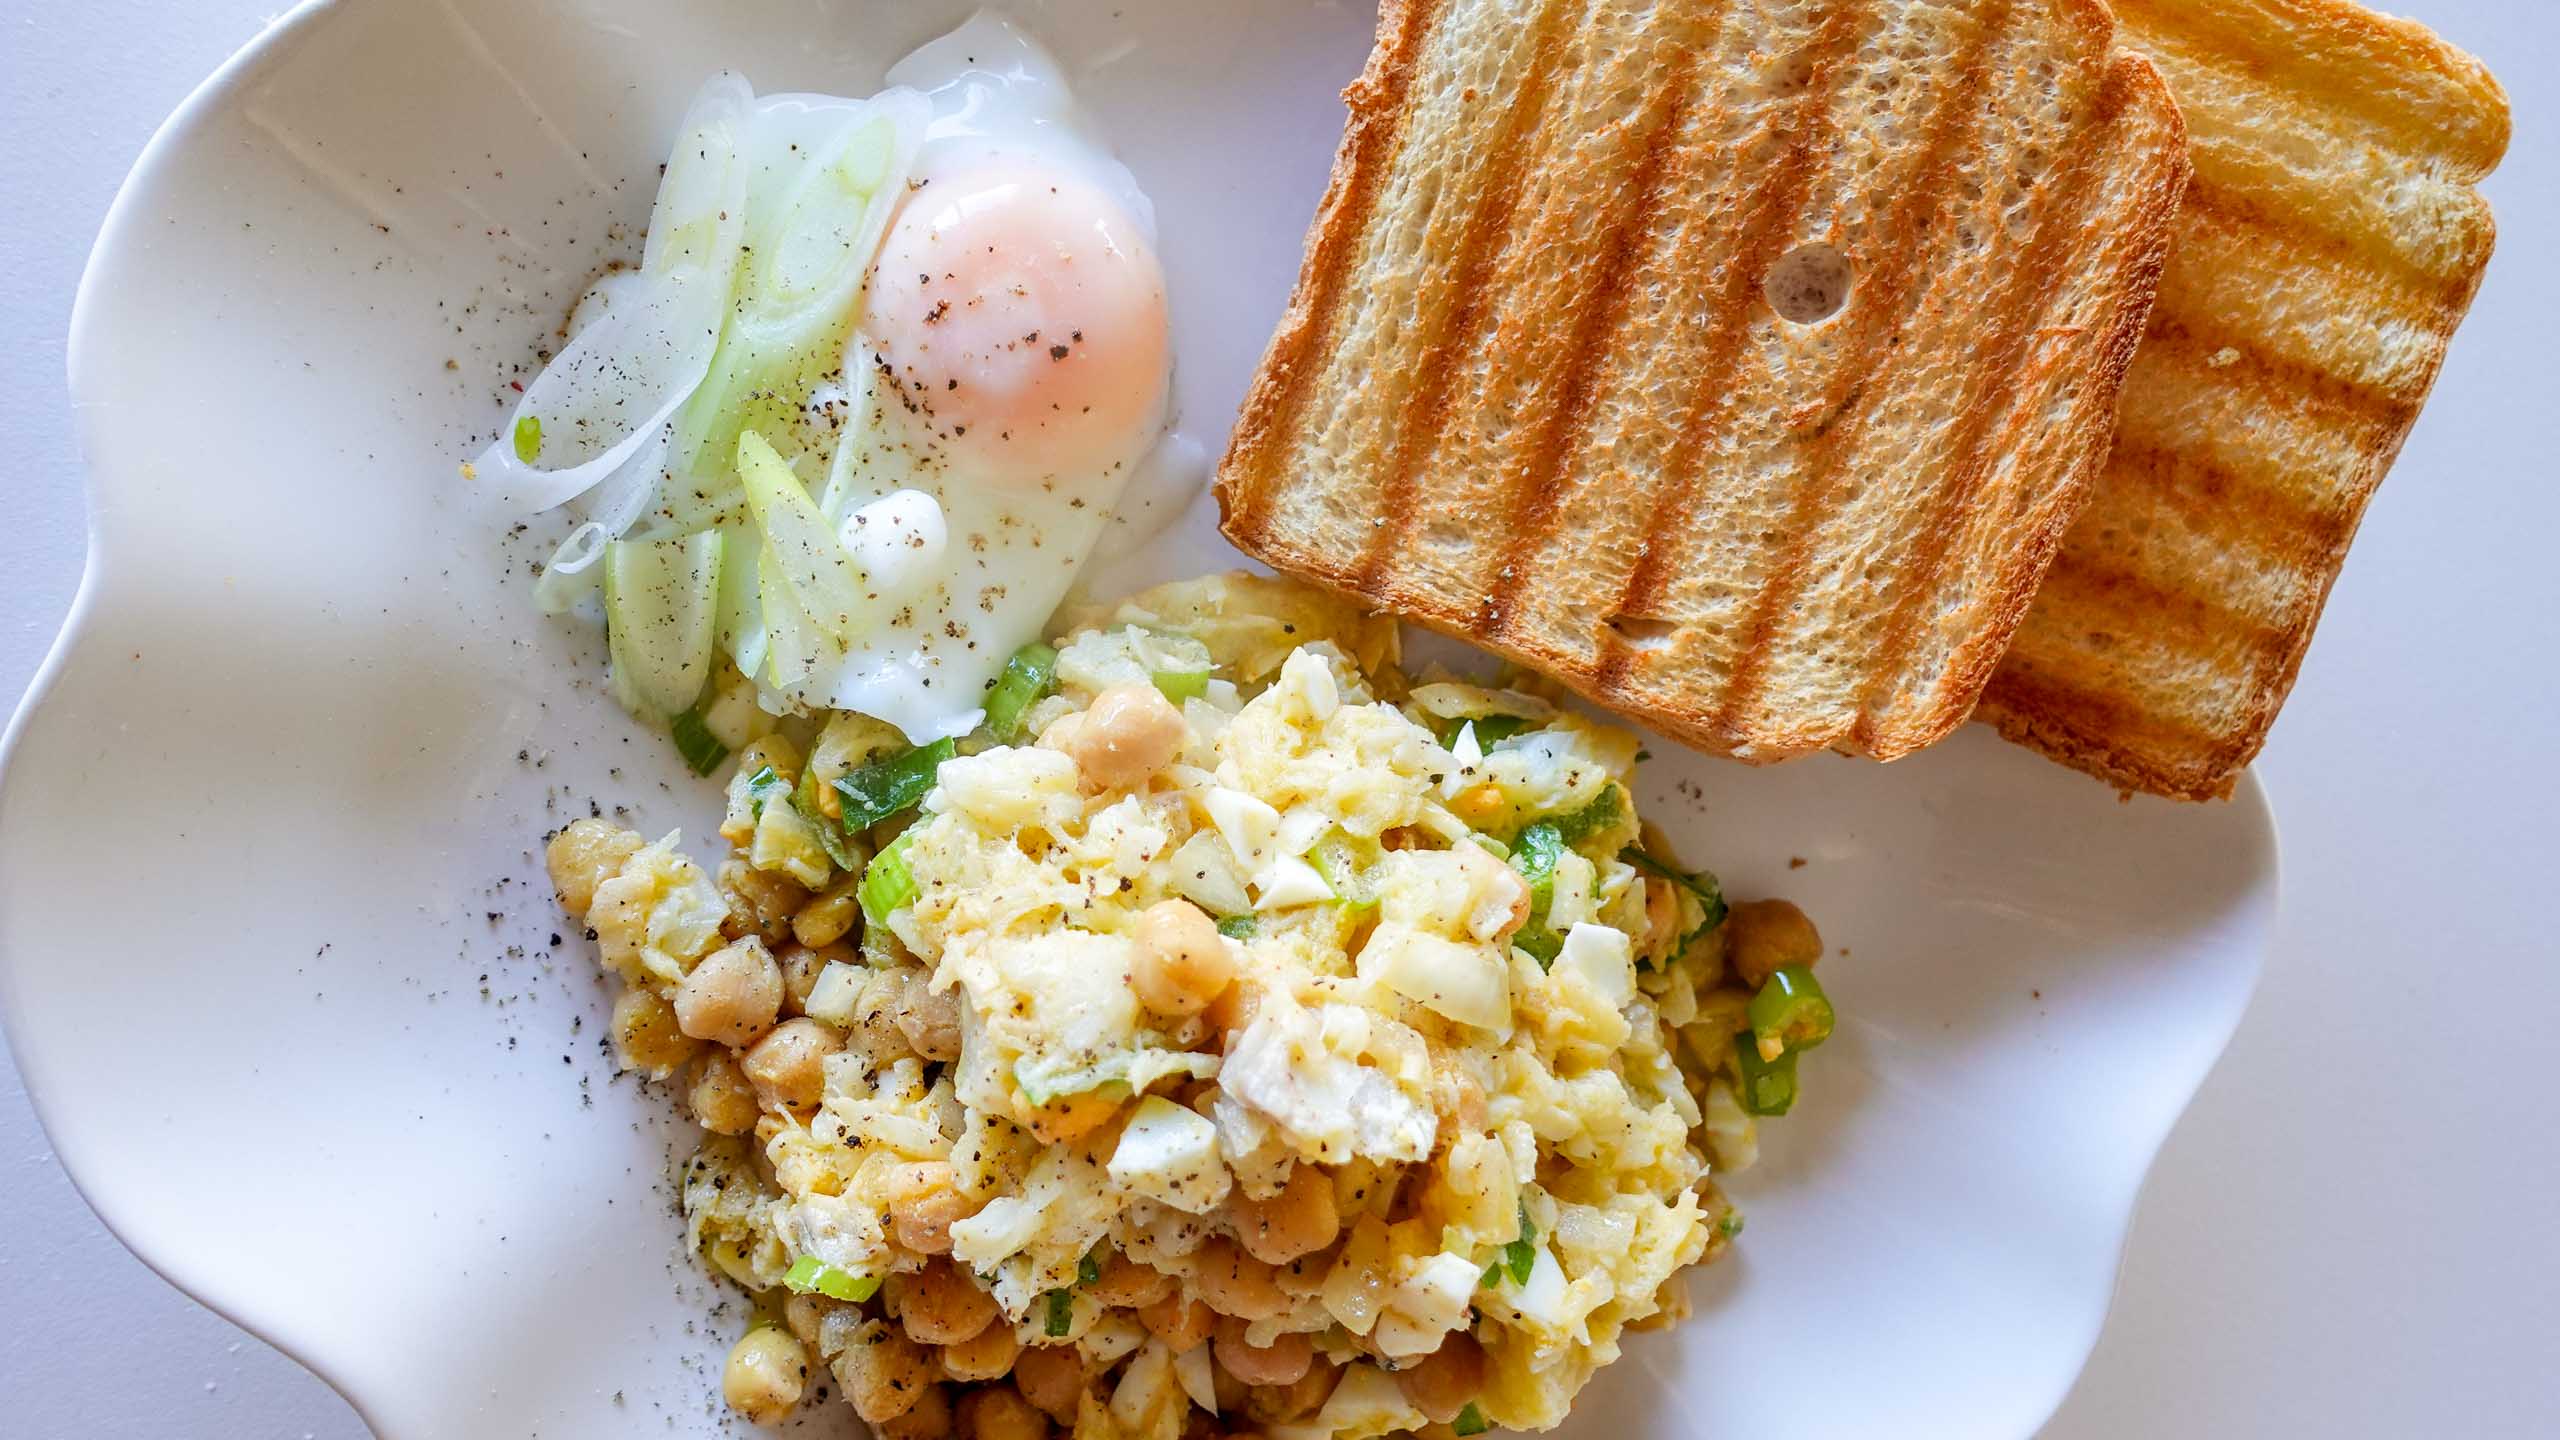 Salad with bread and egg on a plate